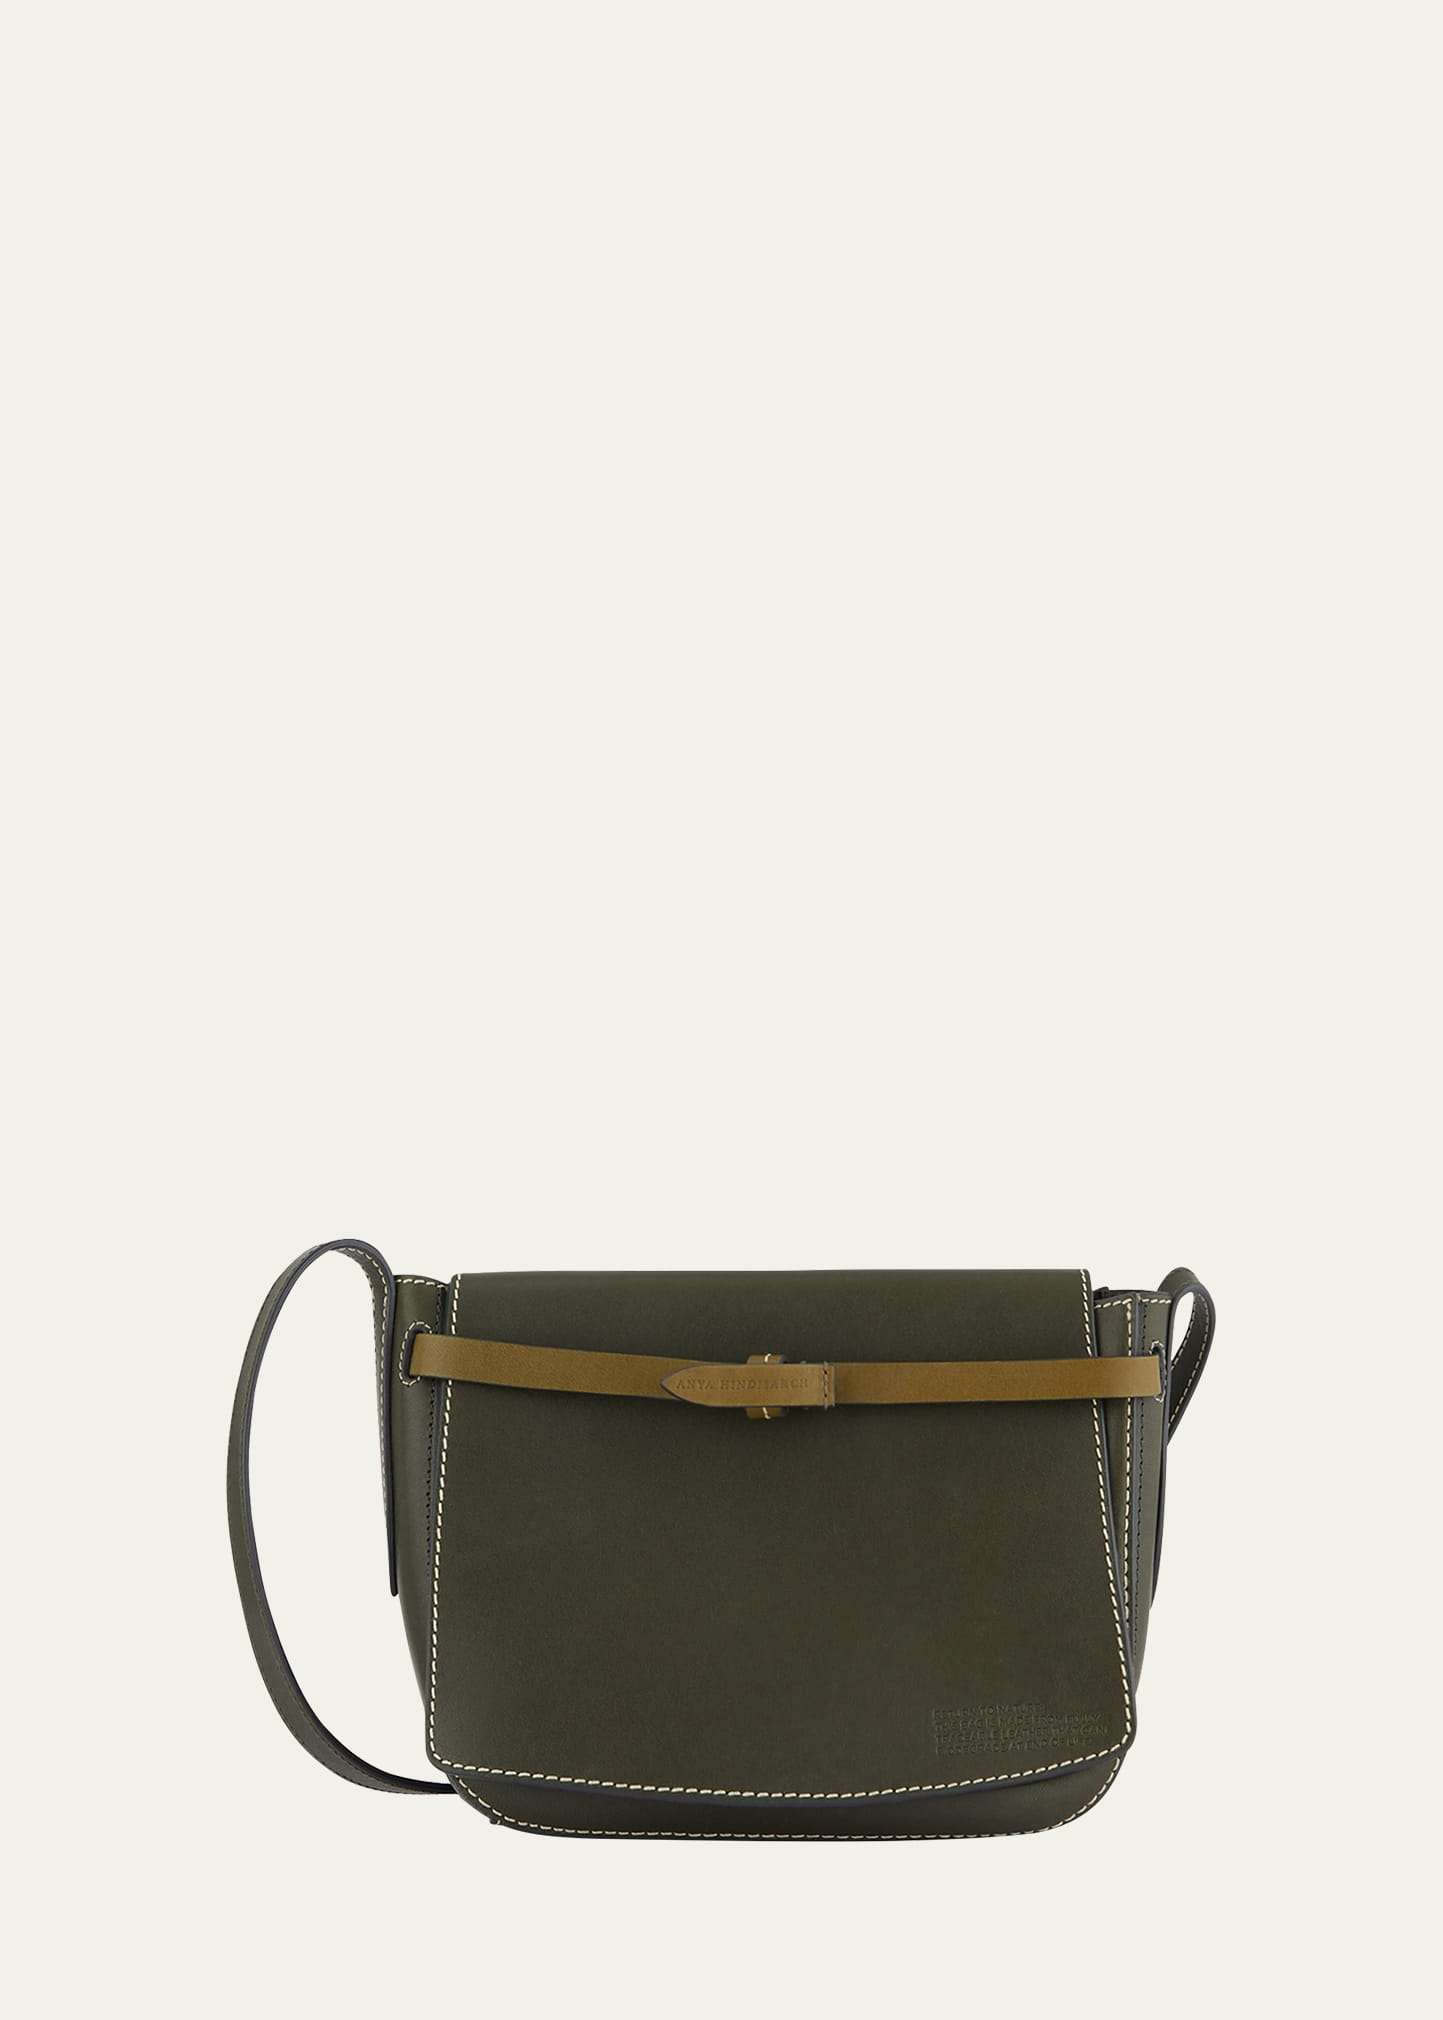 Return to Nature Flap Leather Crossbody Bag